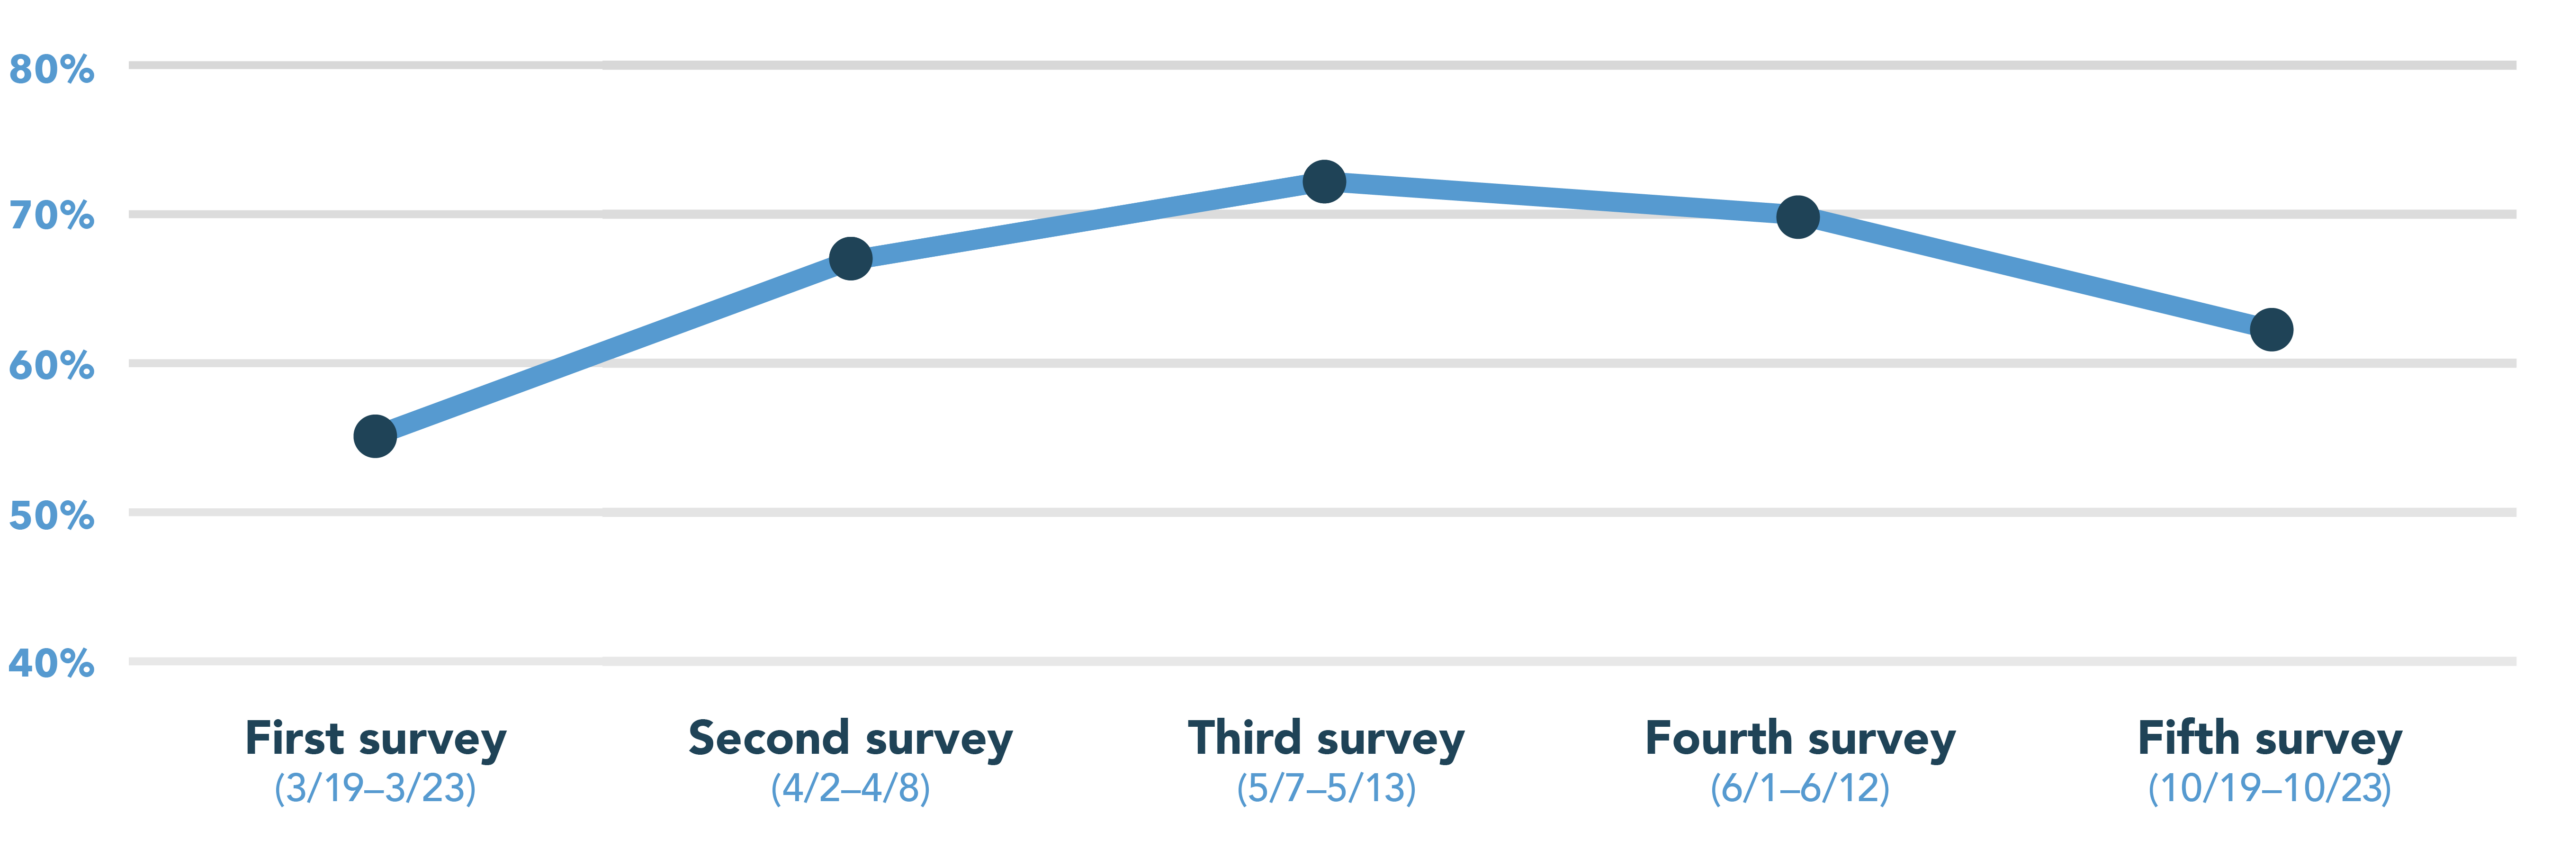 Our latest surveys showed willingness to participate in a clinical trial trending down, from 70% to 62%.